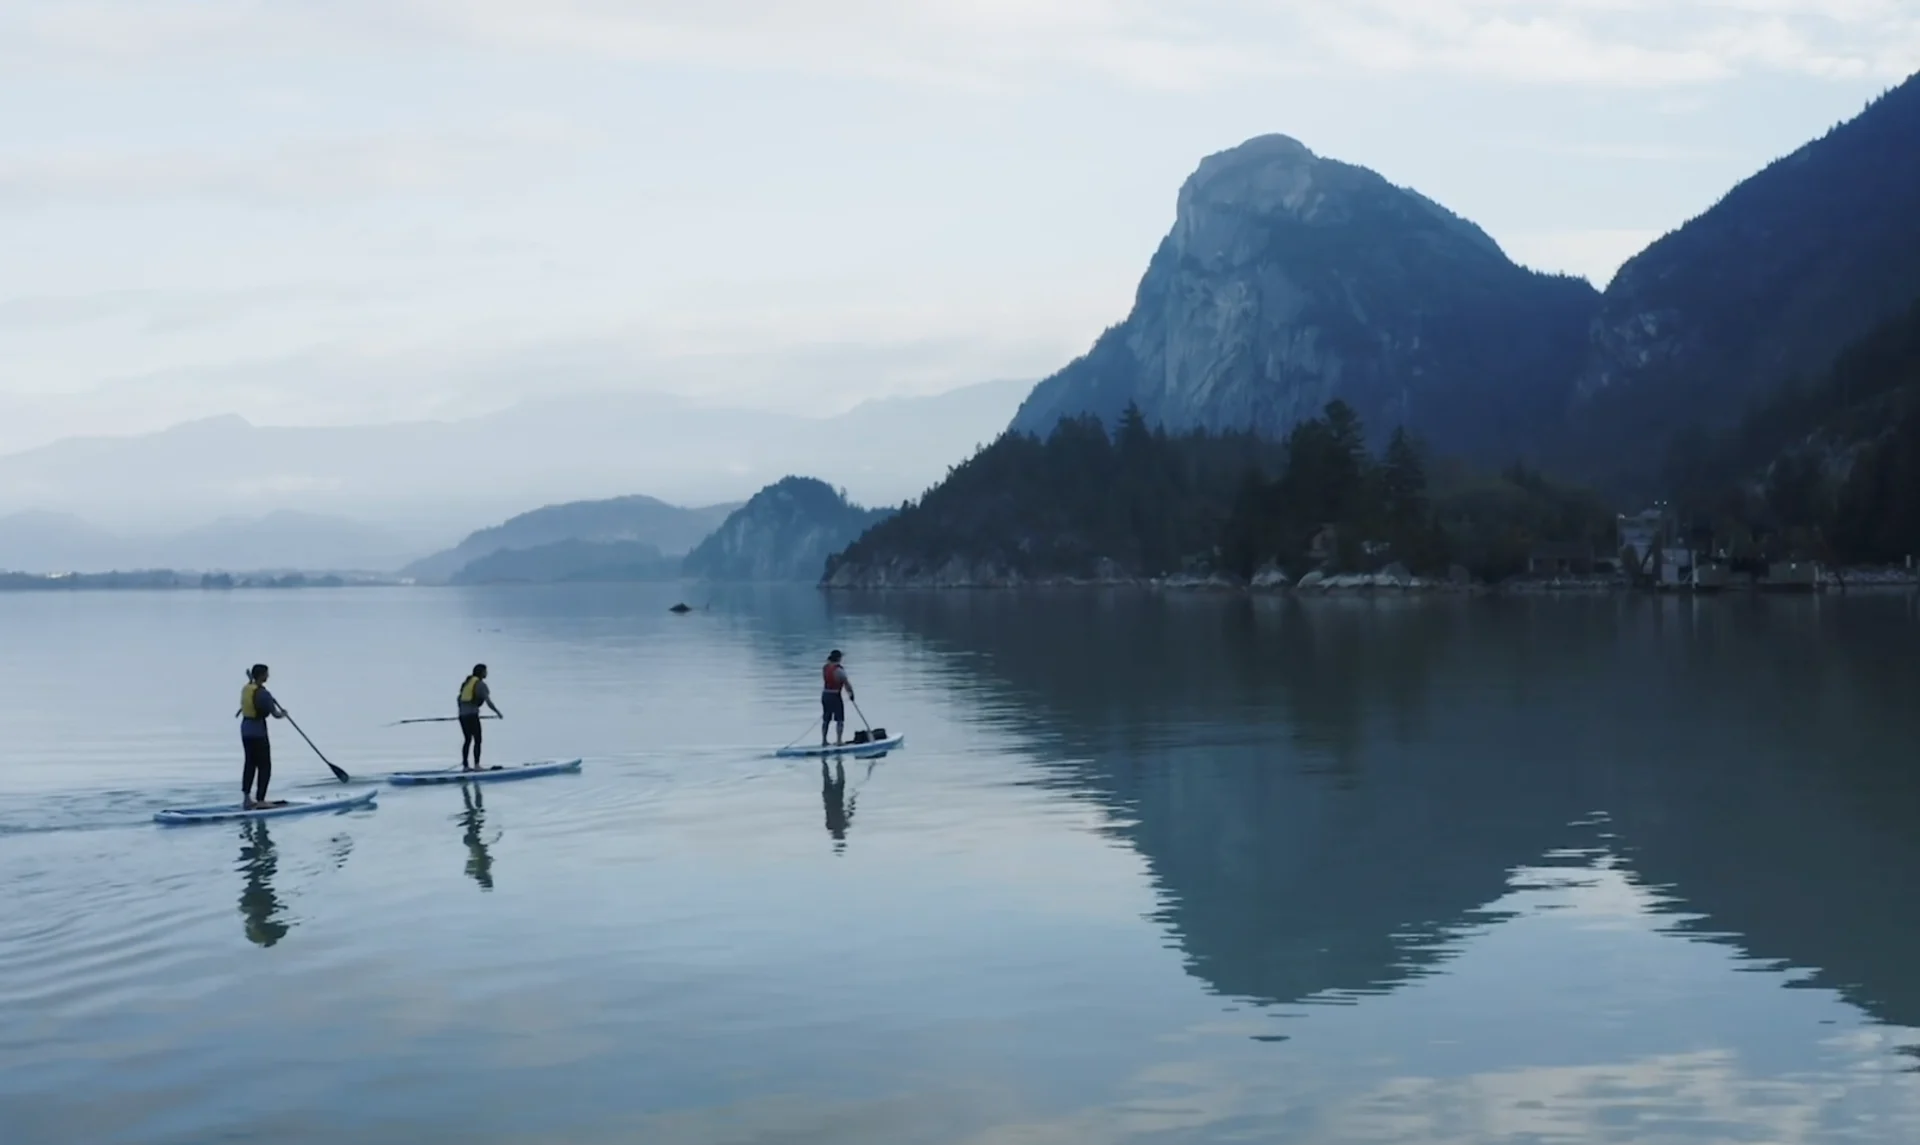 Enjoy everything B.C.'s pristine, beautiful outdoors have to offer, but "Don't Love it to Death," a new campaign says